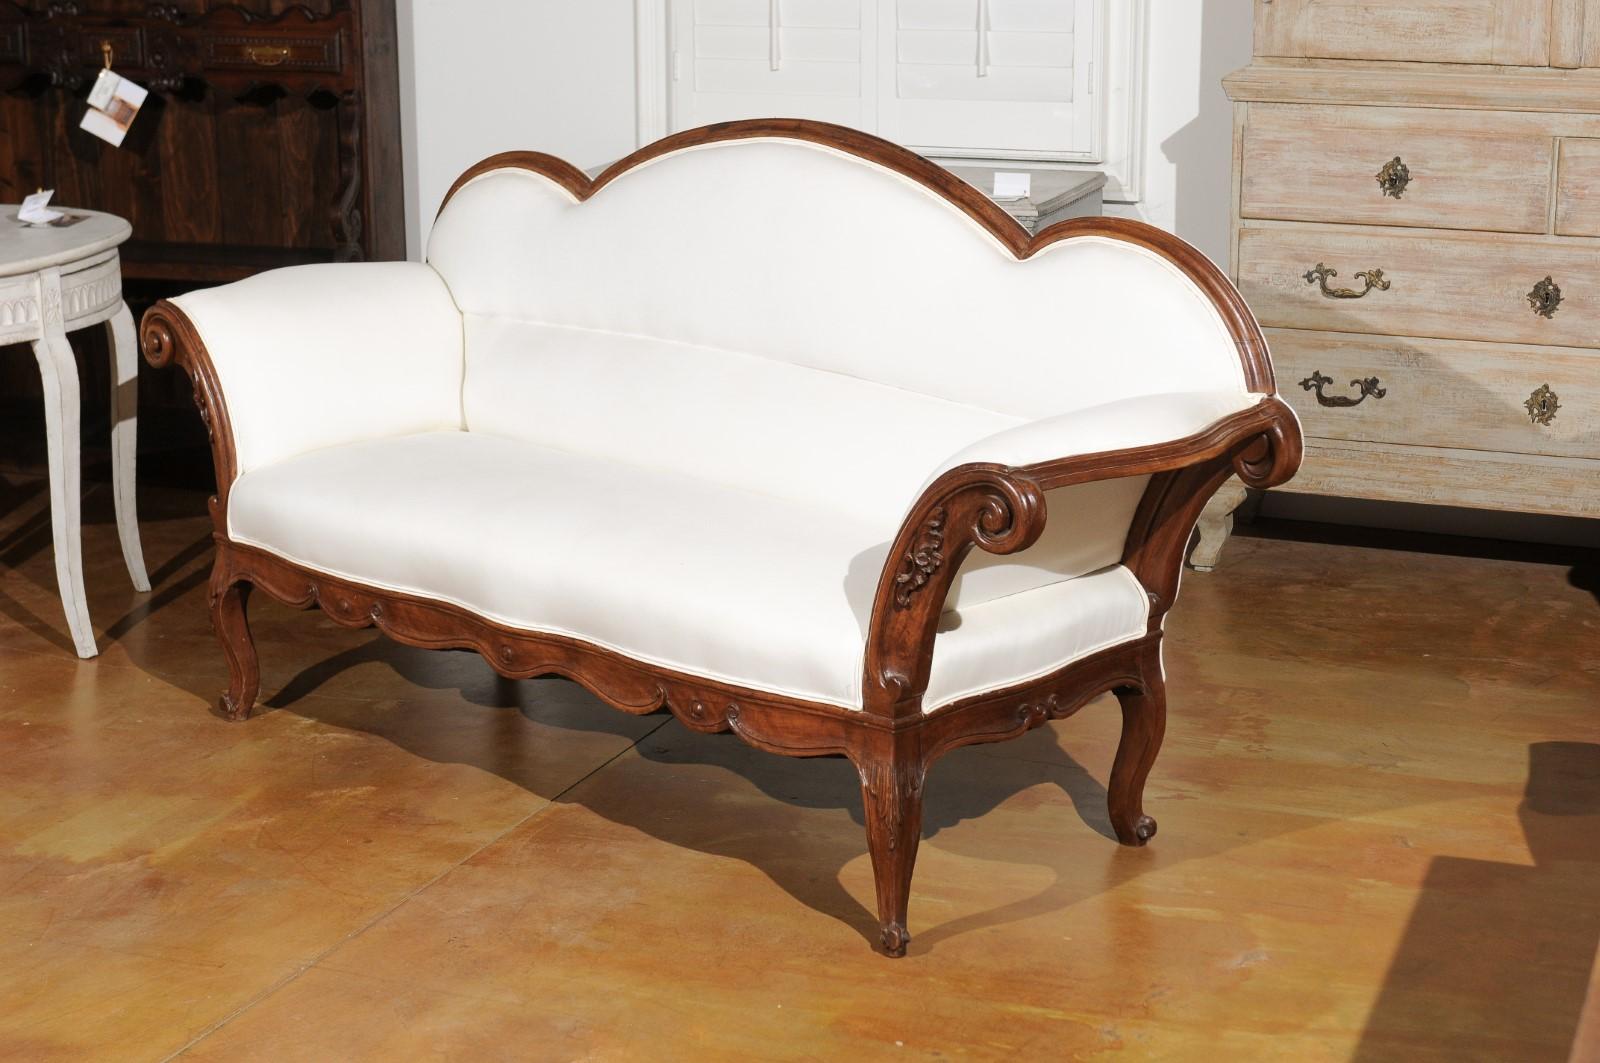 Italian 1750s Walnut Tripled Arched Sofa from Lombardy with New Upholstery In Good Condition For Sale In Atlanta, GA